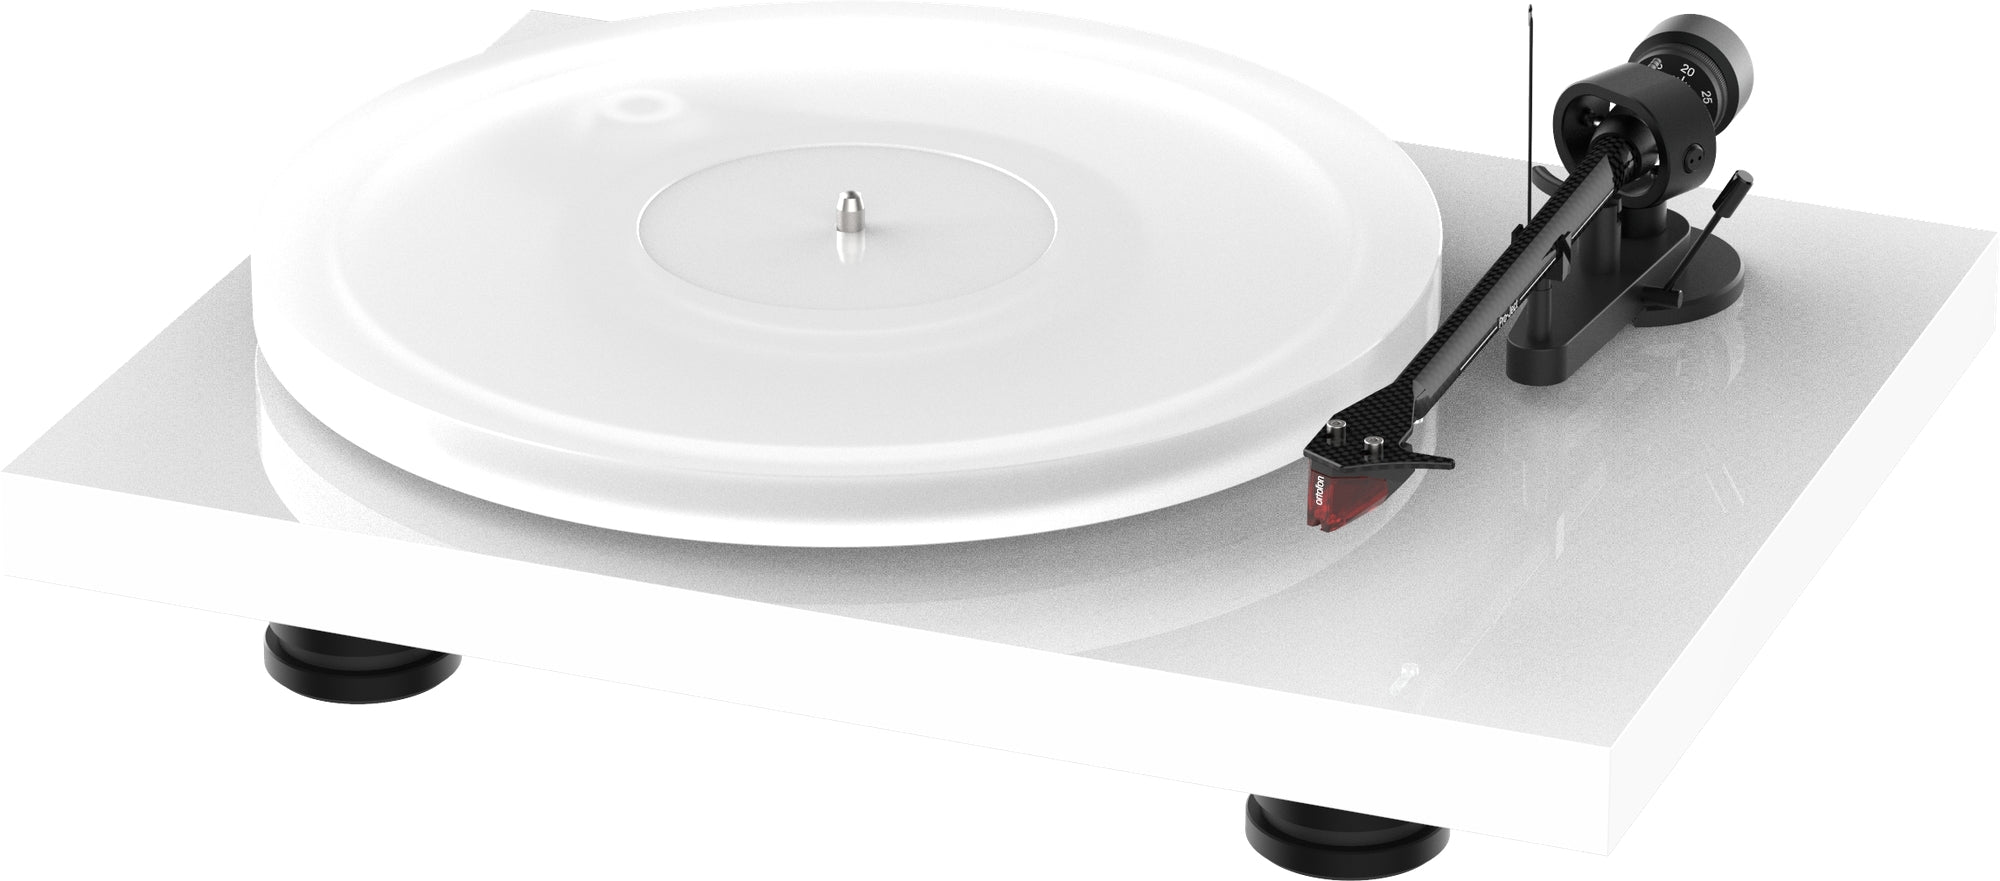 Pro-Ject Debut Carbon Evo + Acryl It 2M Red Cartridge - High Gloss White